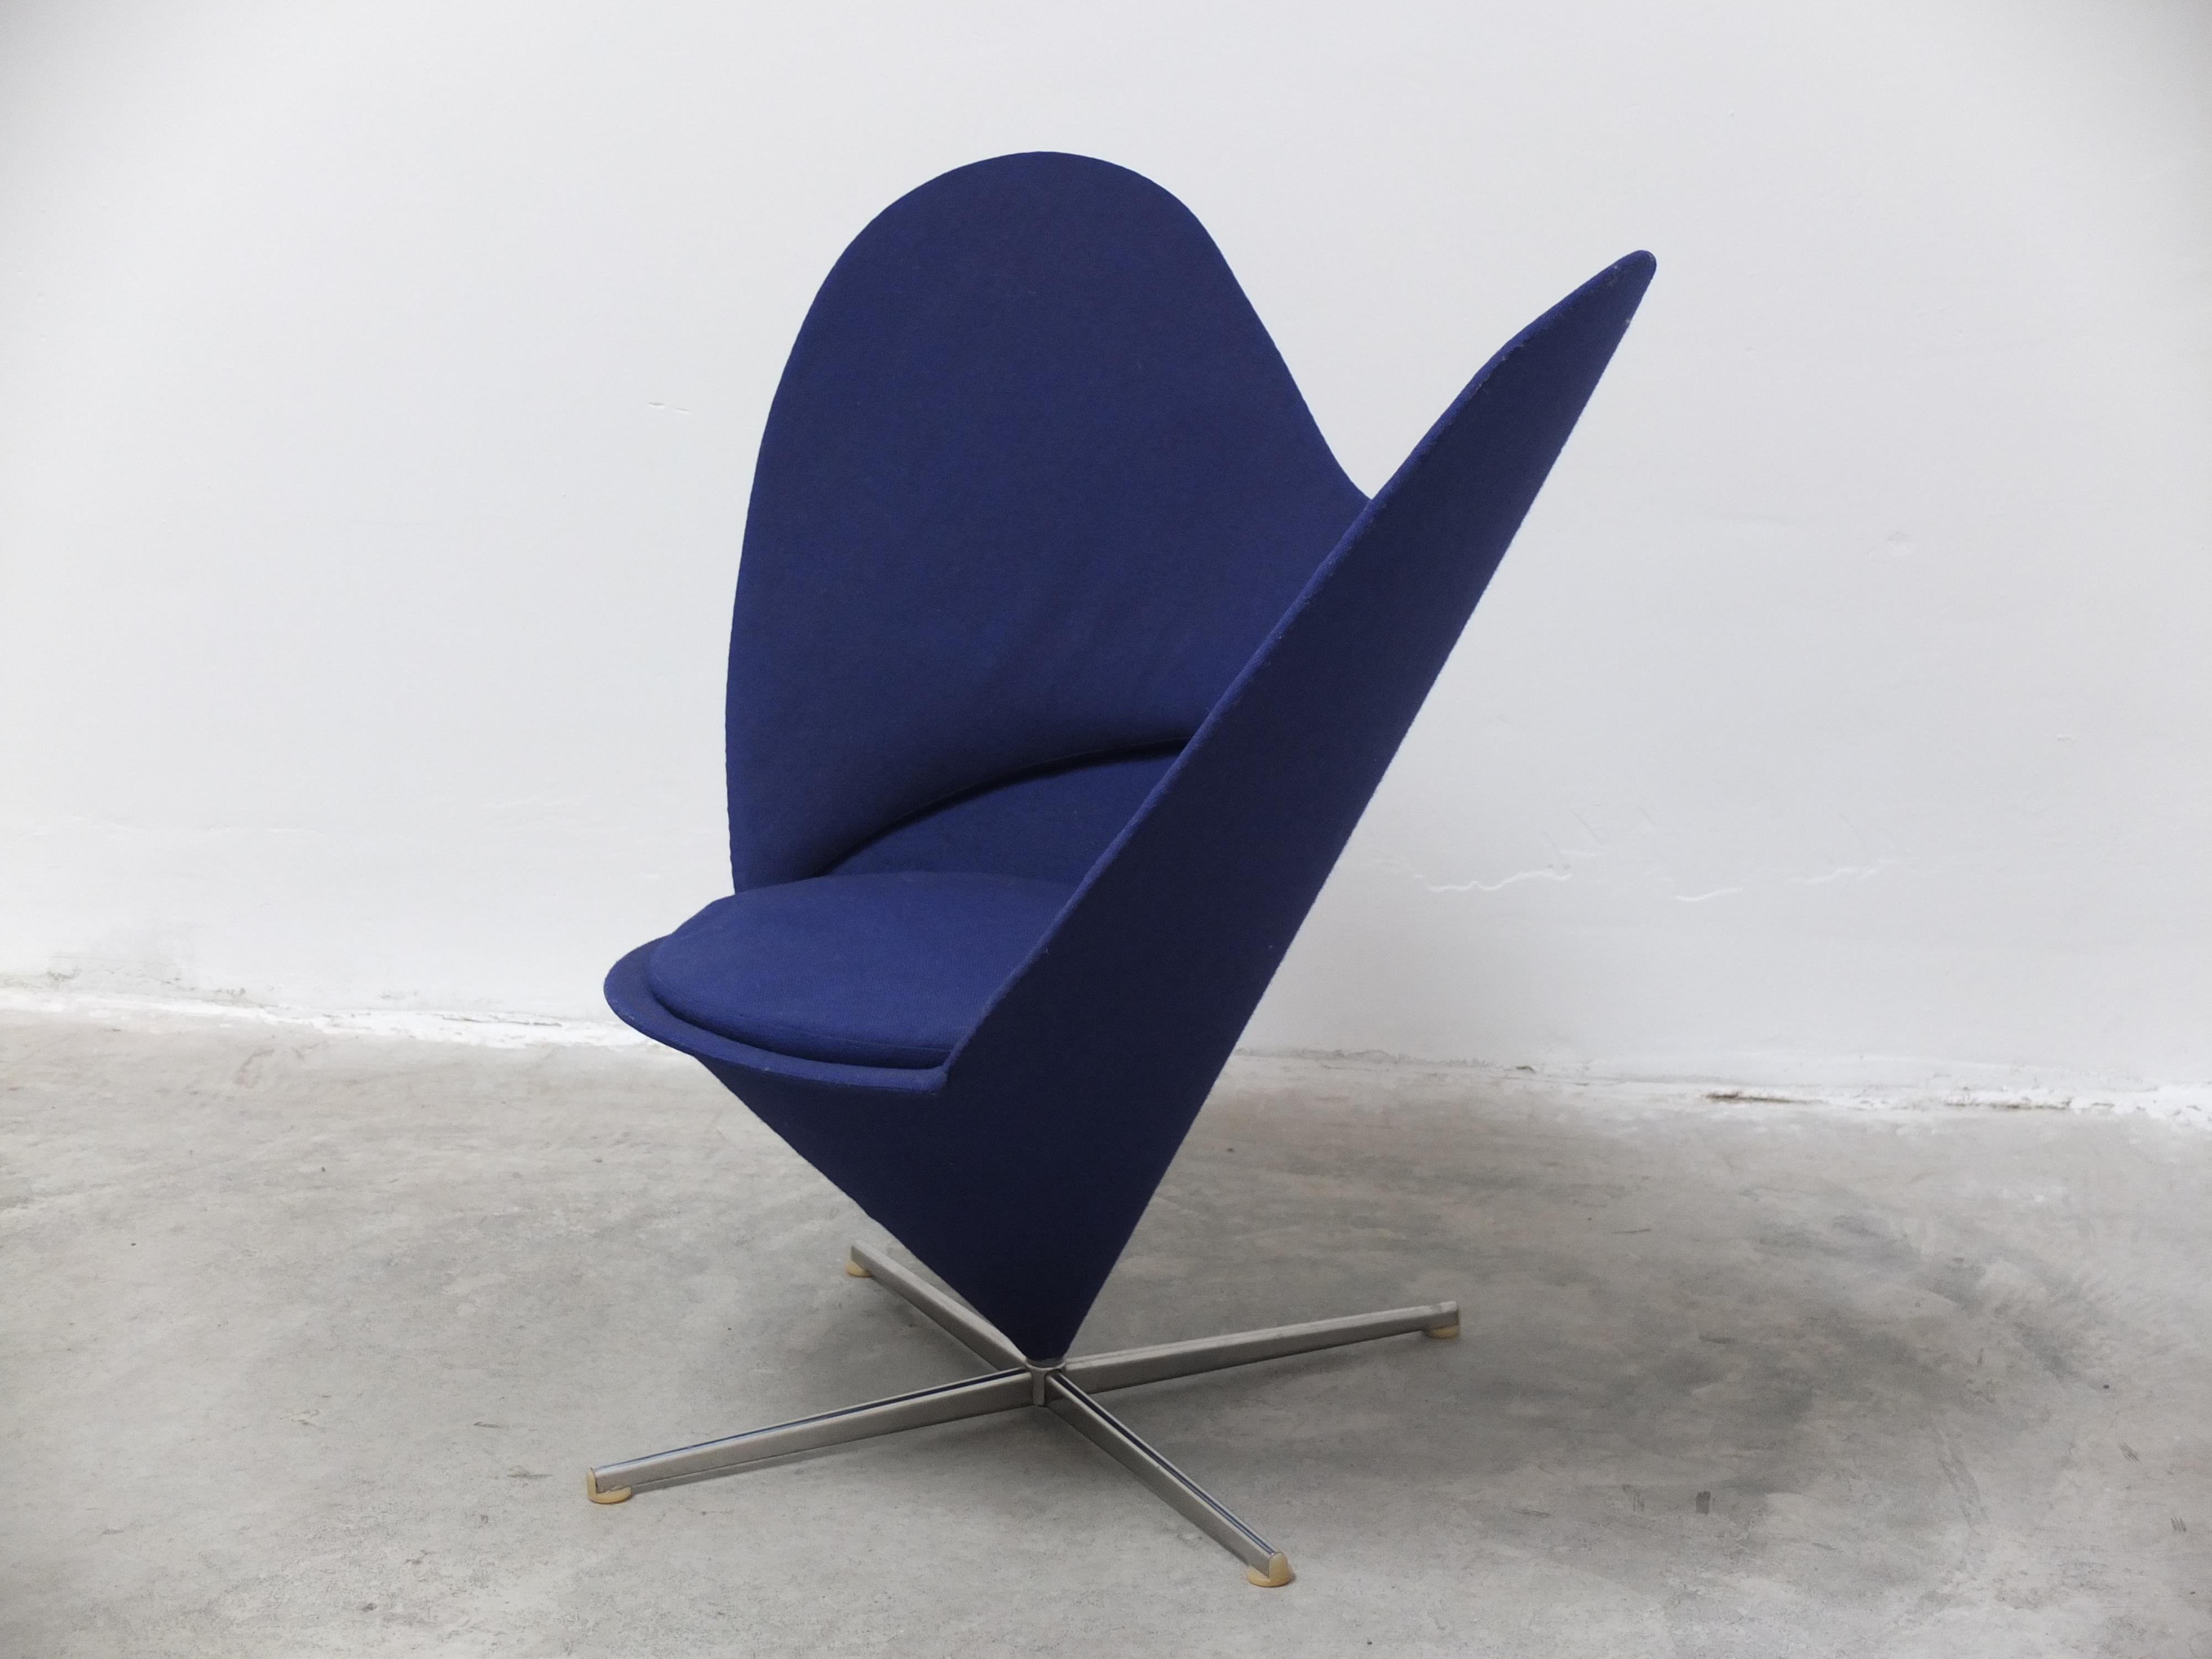 20th Century Iconic 'Heart Cone' Chair by Verner Panton for Plus Linje, 1958 For Sale